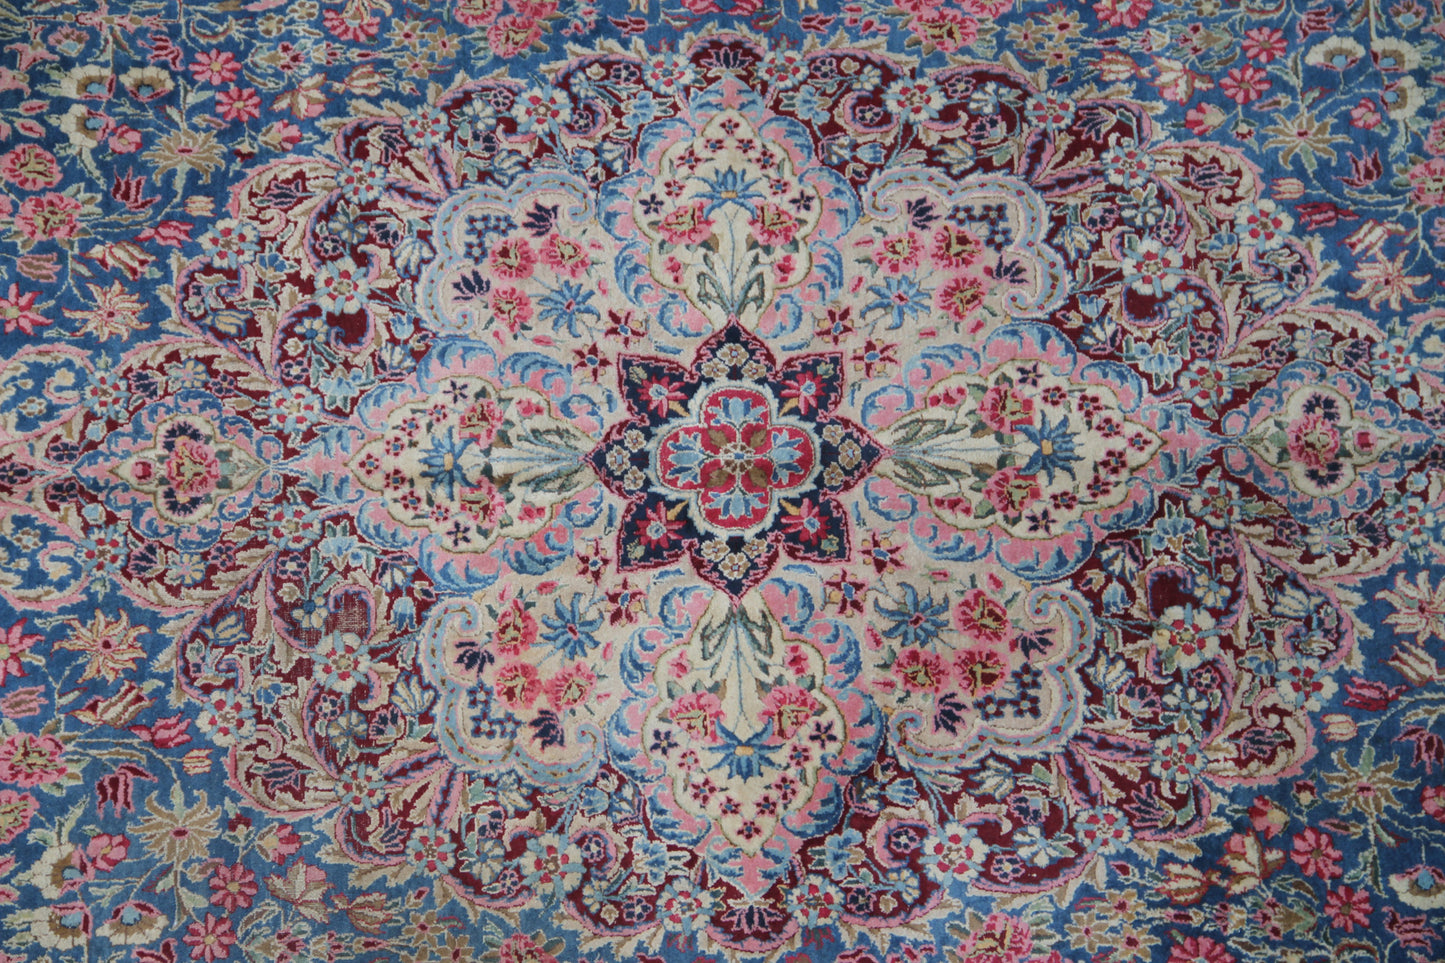 10'x16' Blue Camel and Ivory Antique Persian Kerman Rug